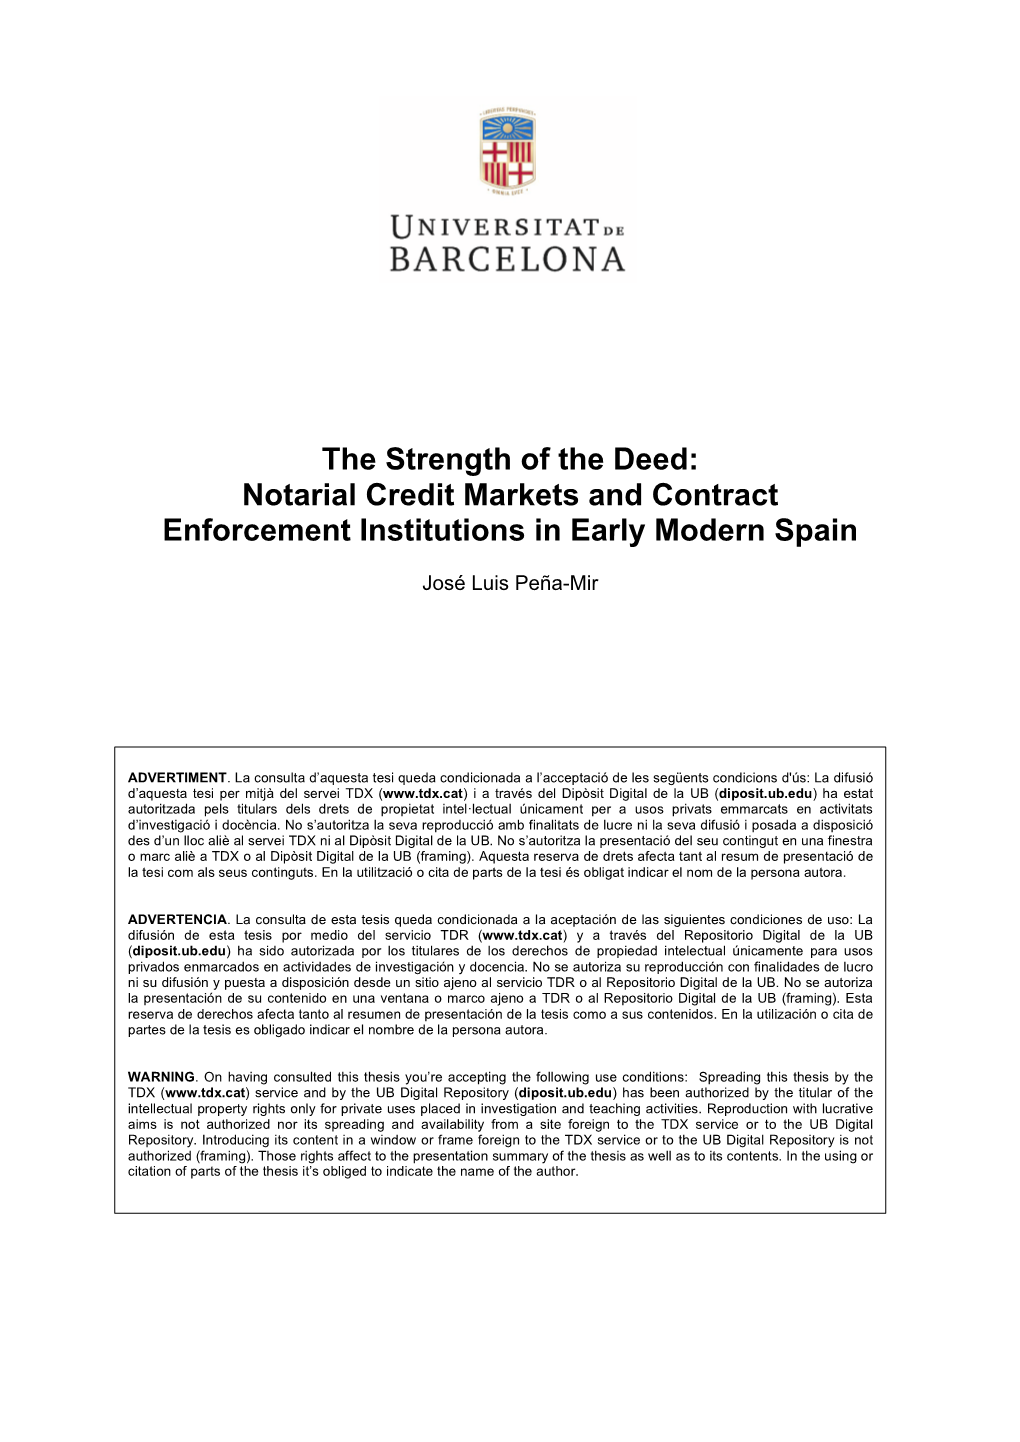 Notarial Credit Markets and Contract Enforcement Institutions in Early Modern Spain